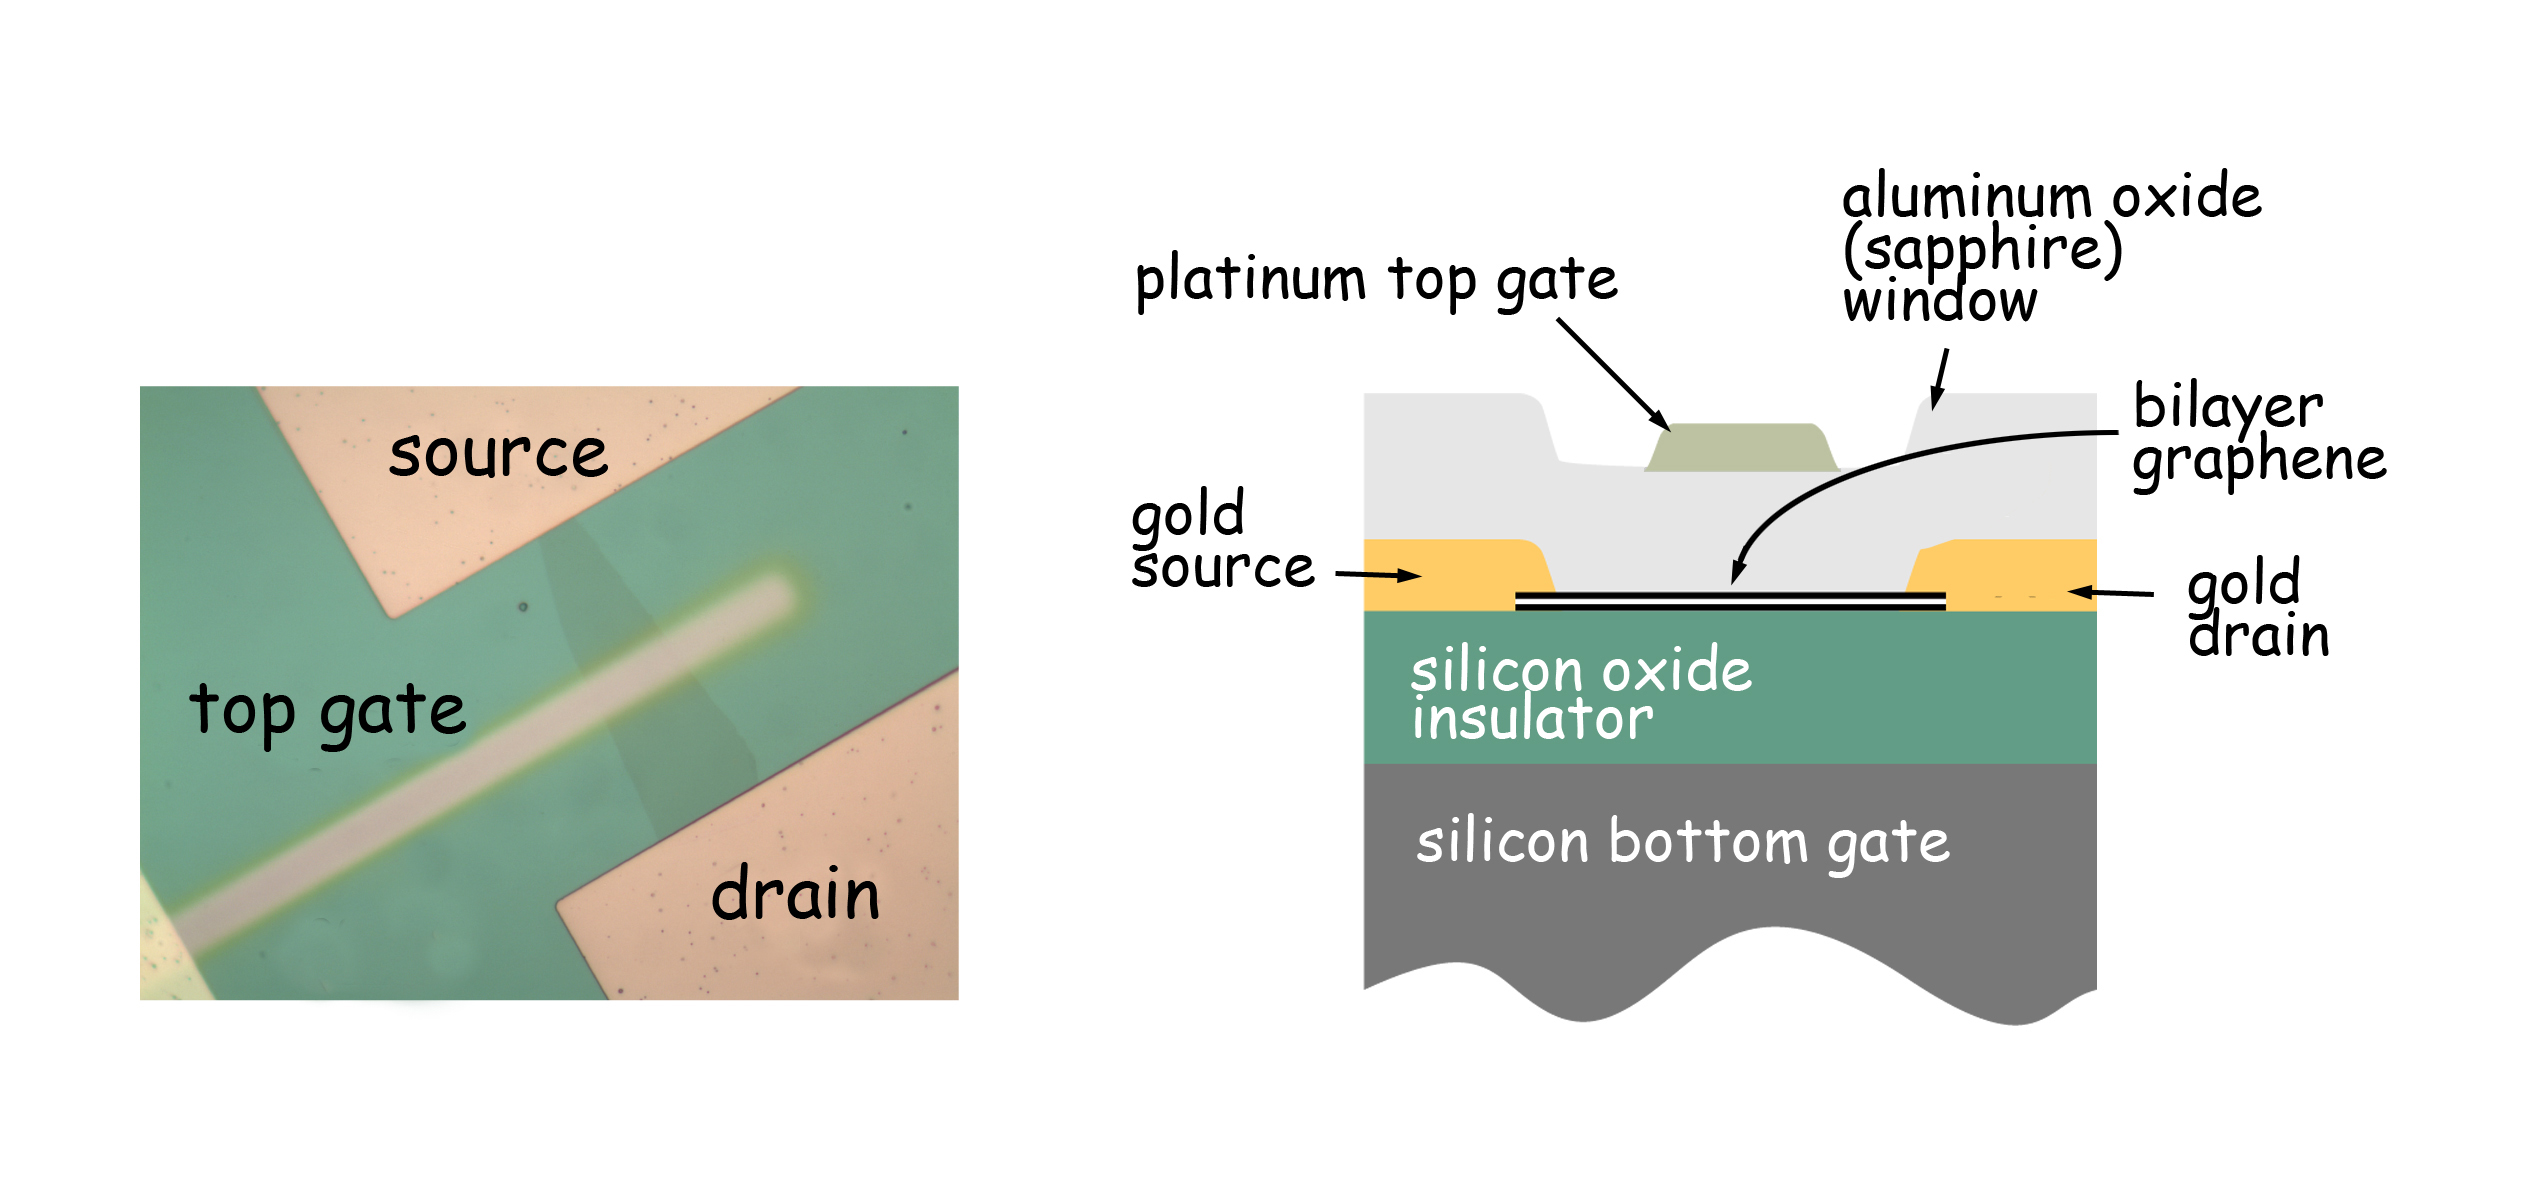 At left, a microscope image looking down through the bilayer-graphene field-effect transistor – the orientation as seen by the synchrotron beam. Diagram at right identifies the elements.